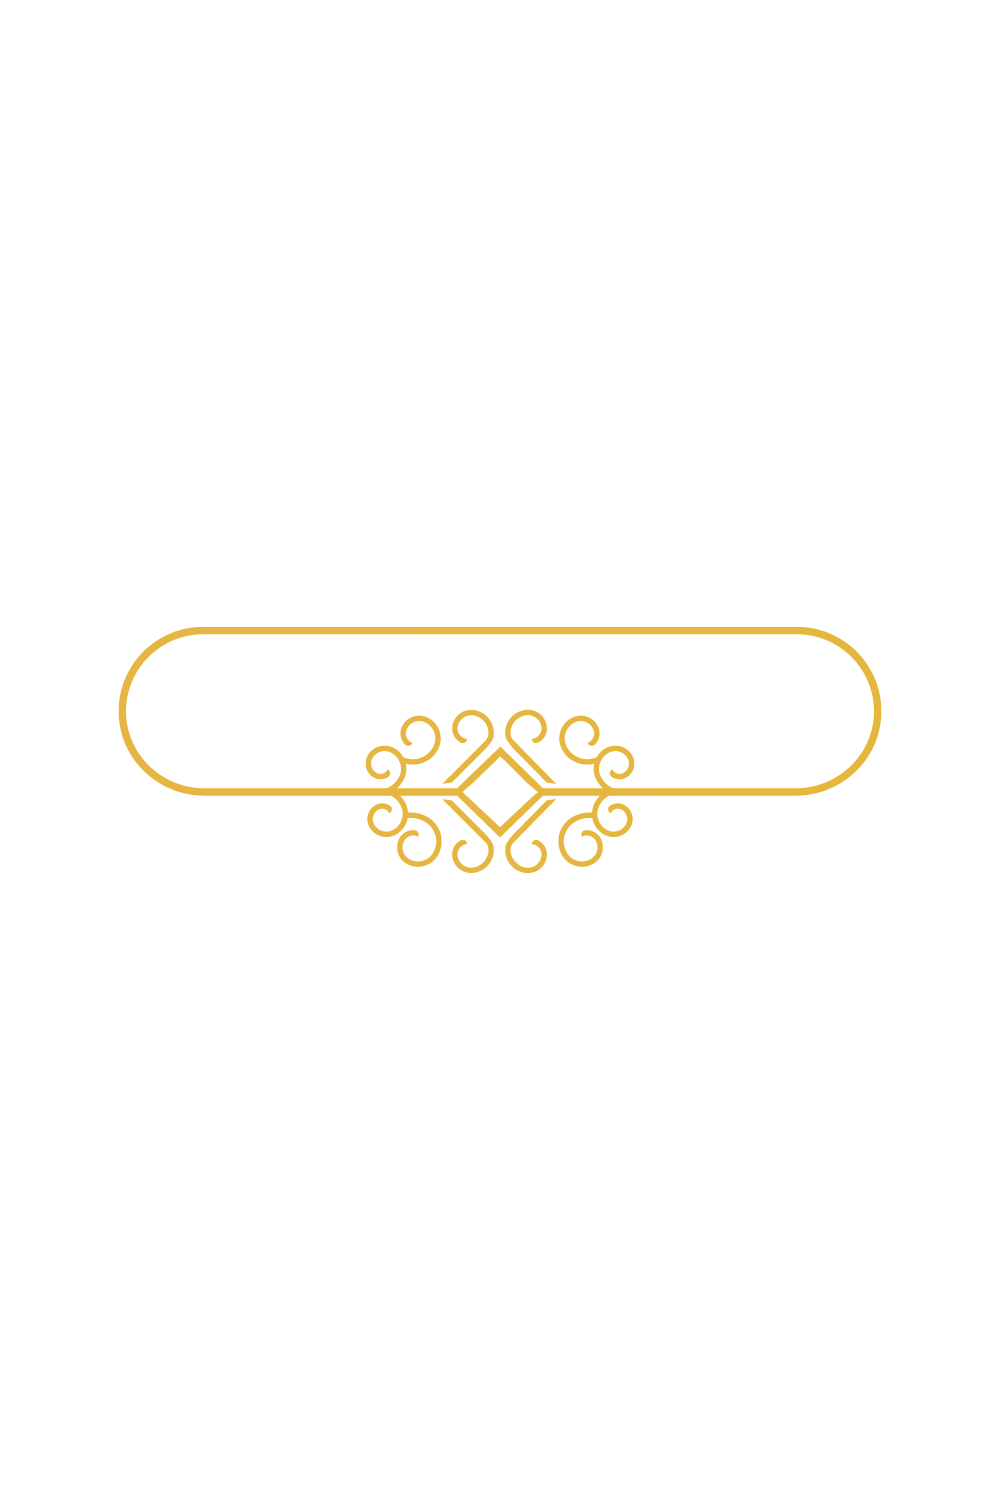 Abstract logo design vector icon Golden color best icon pinterest preview image.